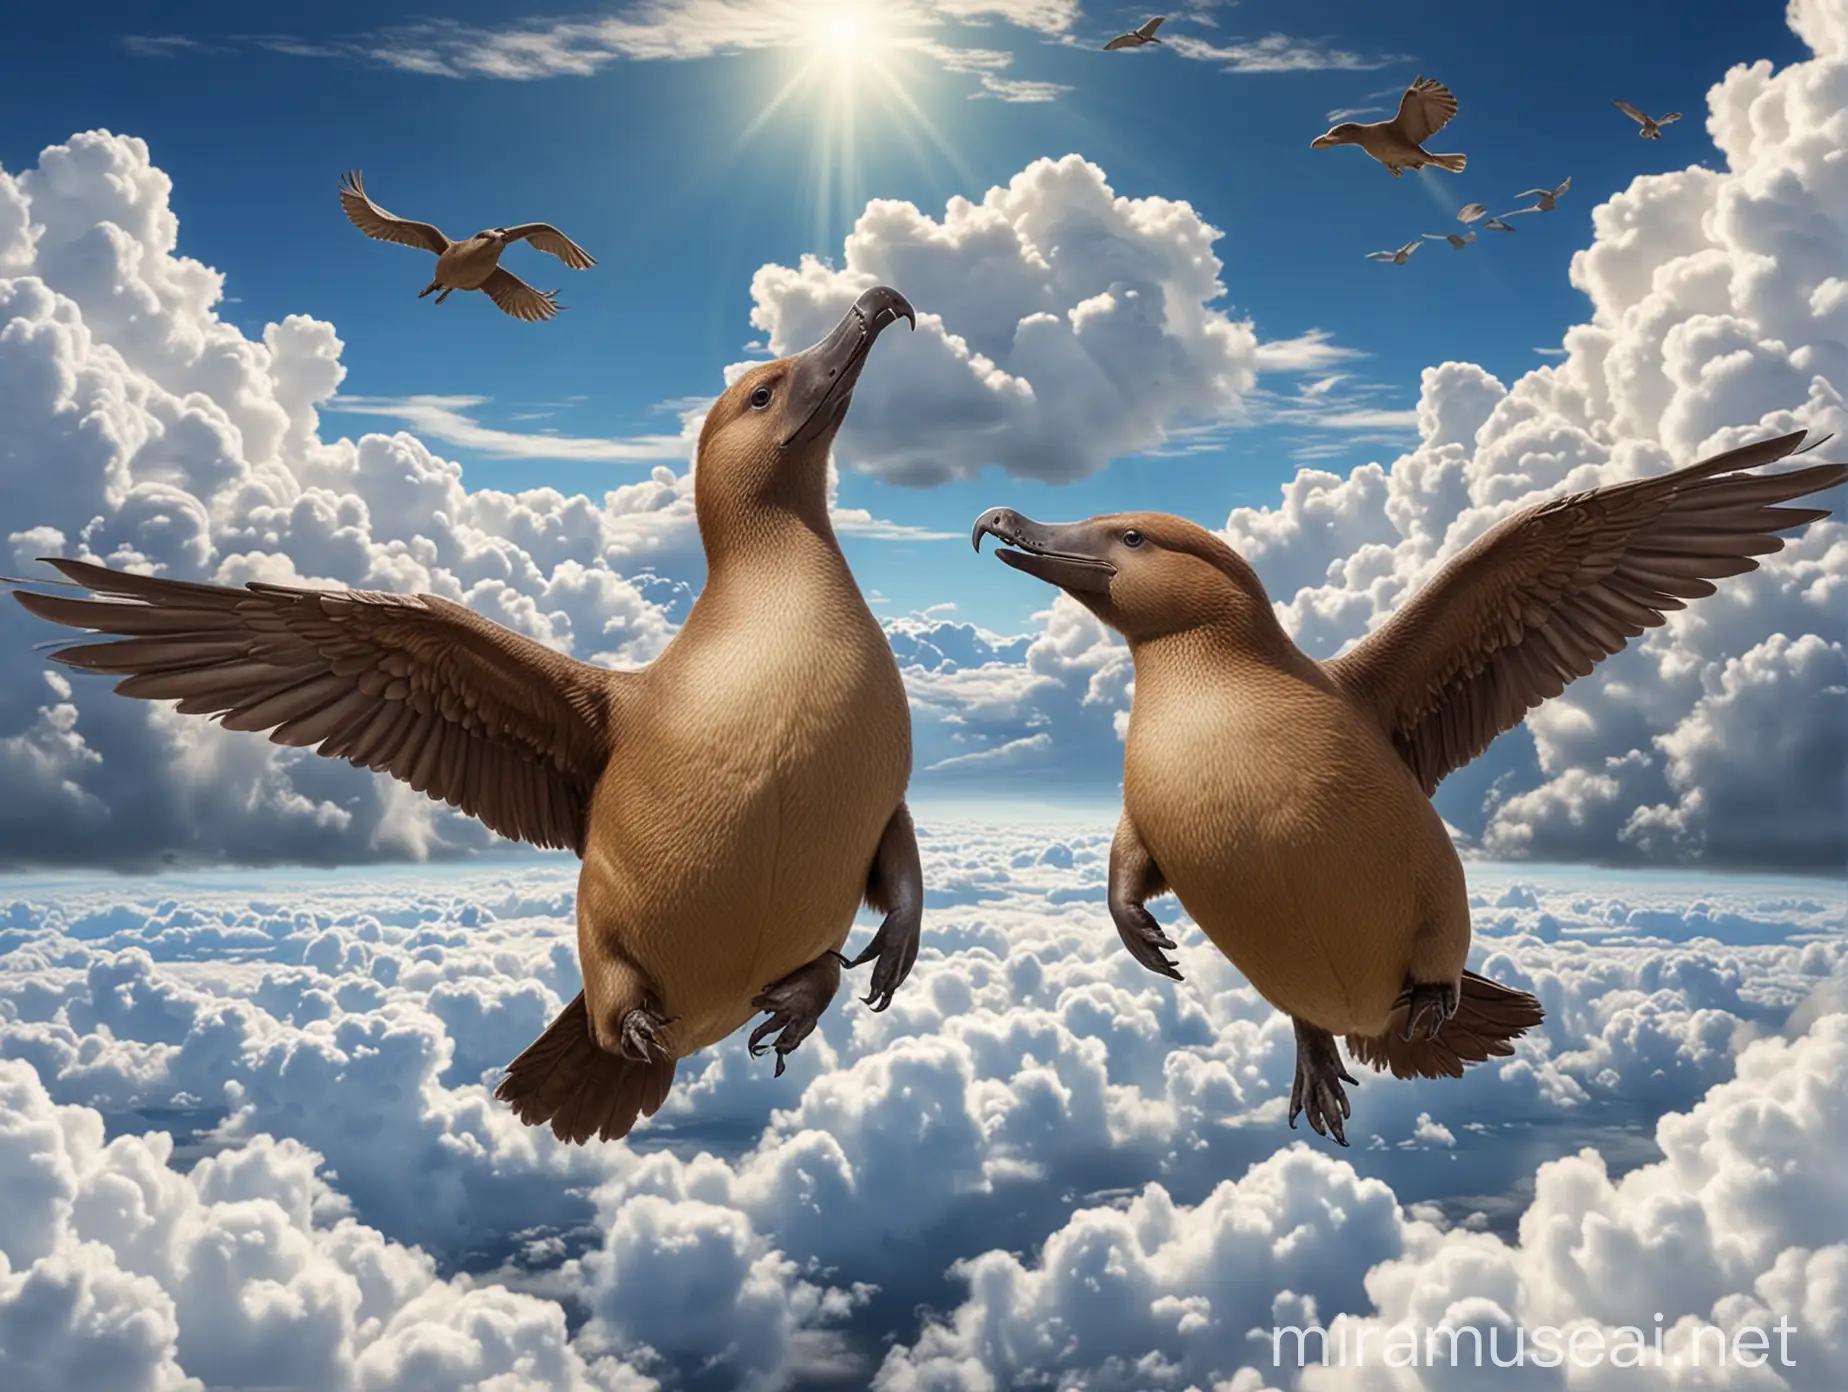 Kiwi Bird and Platypus in Heavenly Cloudscape